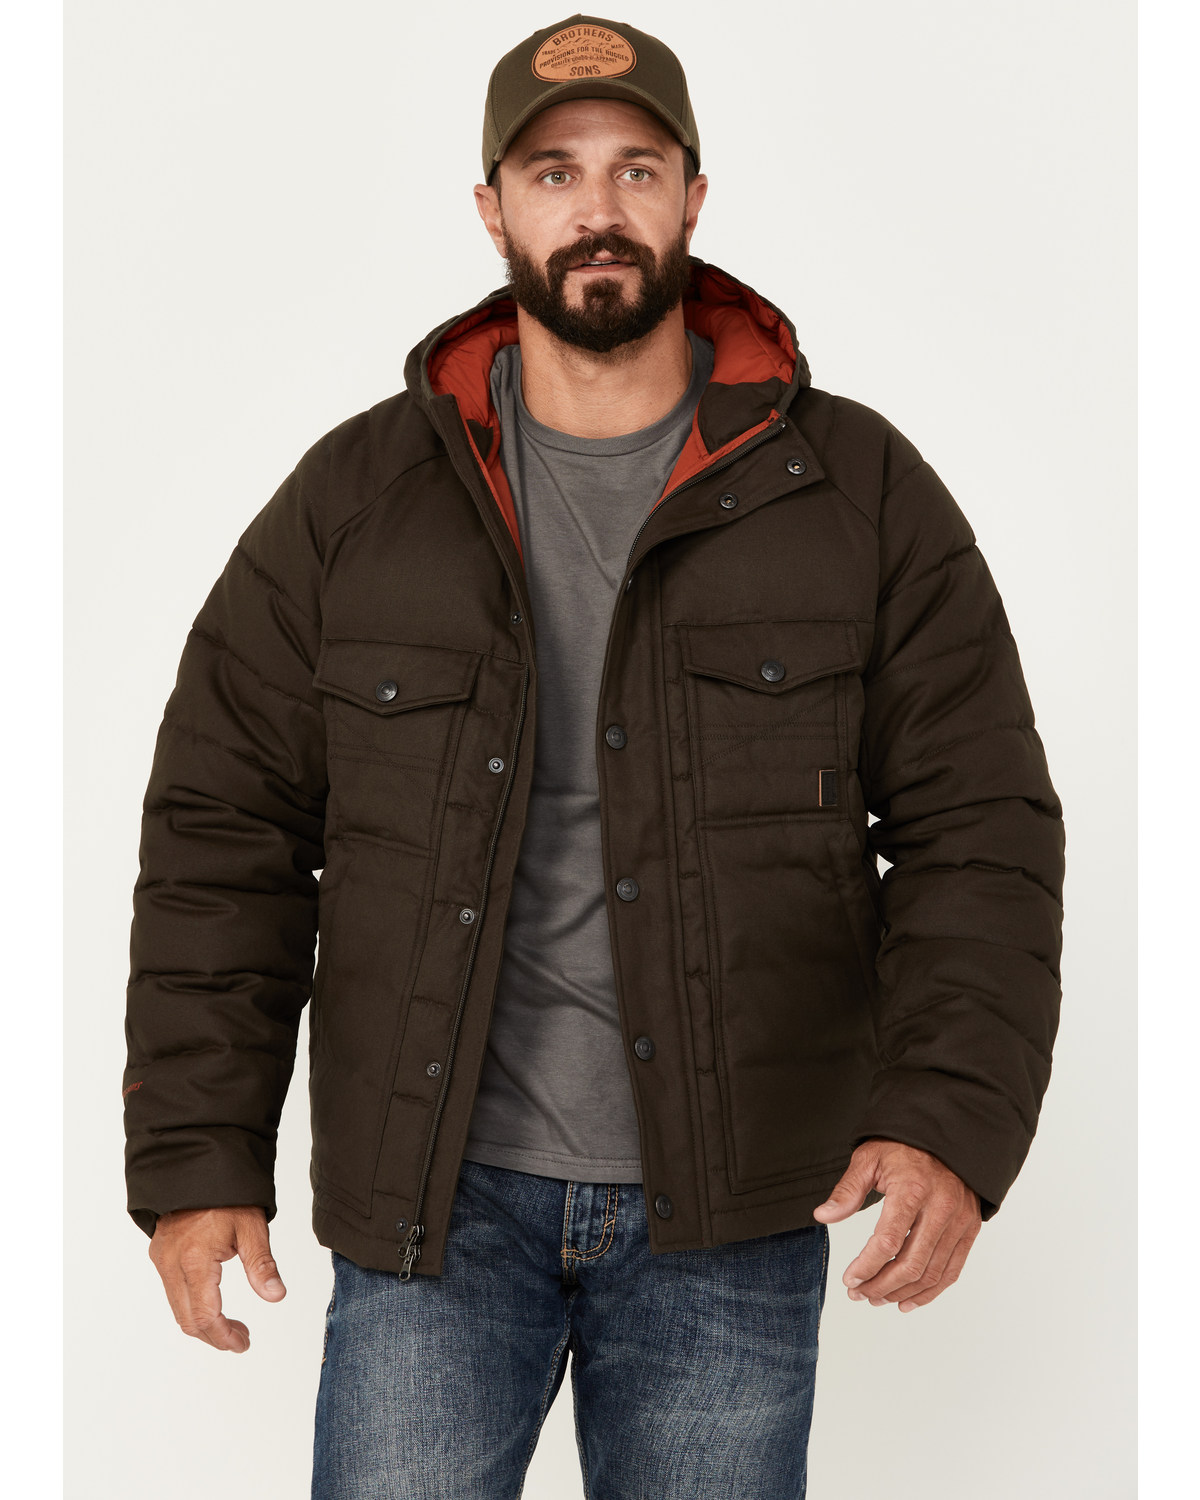 Brothers and Sons Men's Uinta Utility Snap Jacket